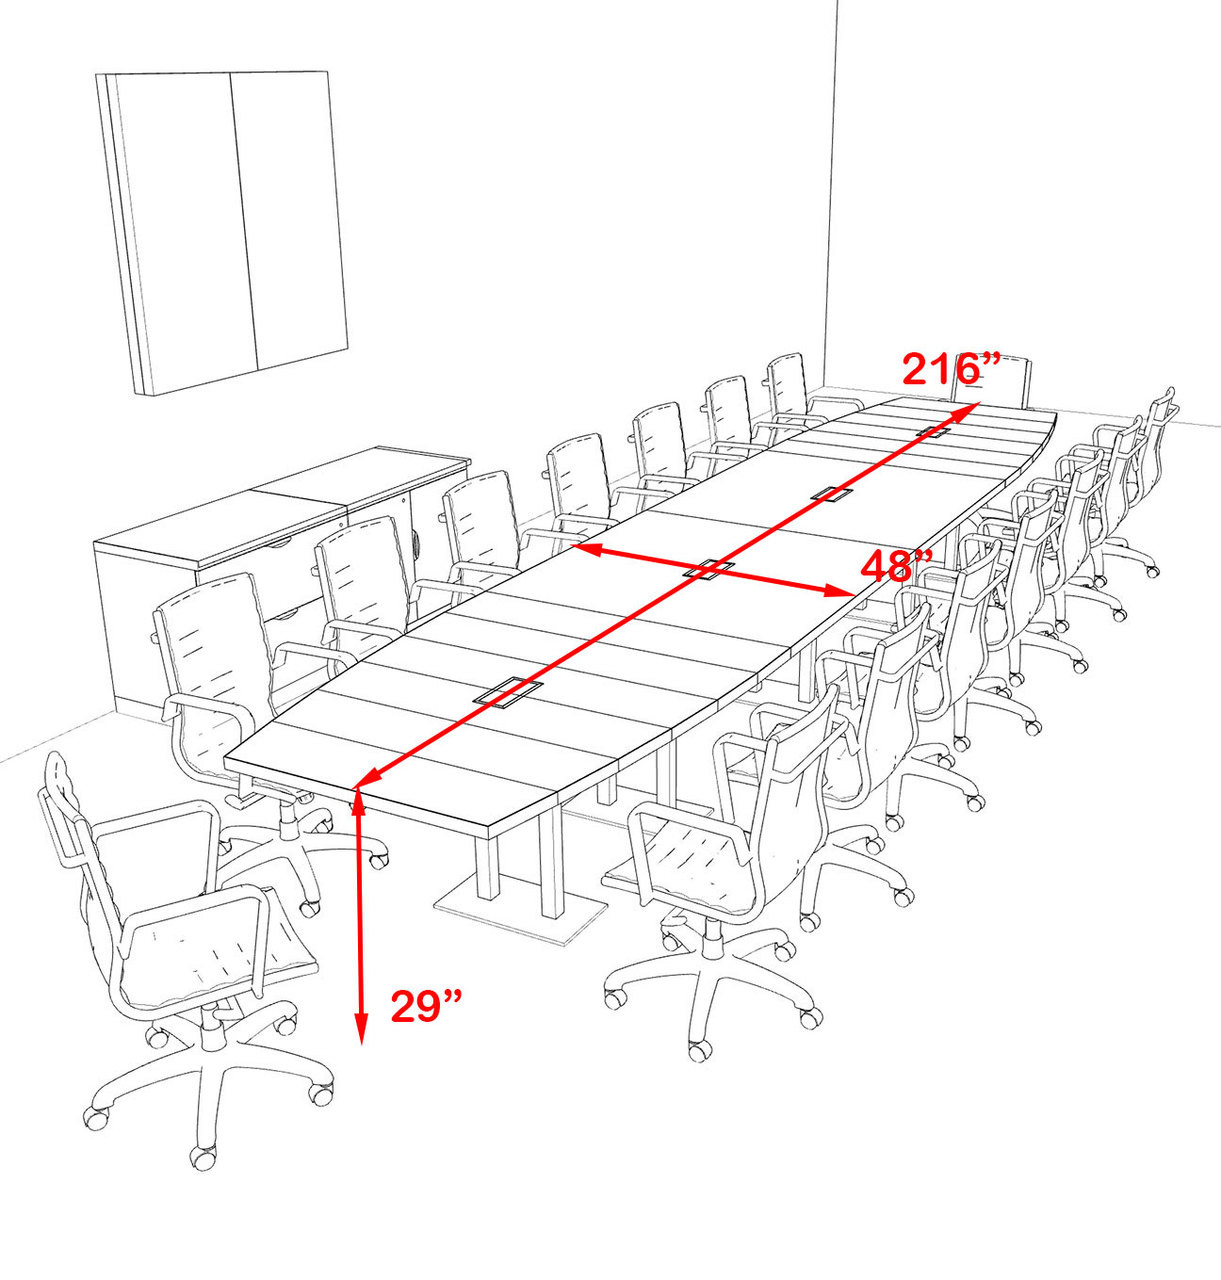 Modern Boat Shaped Steel Leg 18' Feet Conference Table, #OF-CON-CM50